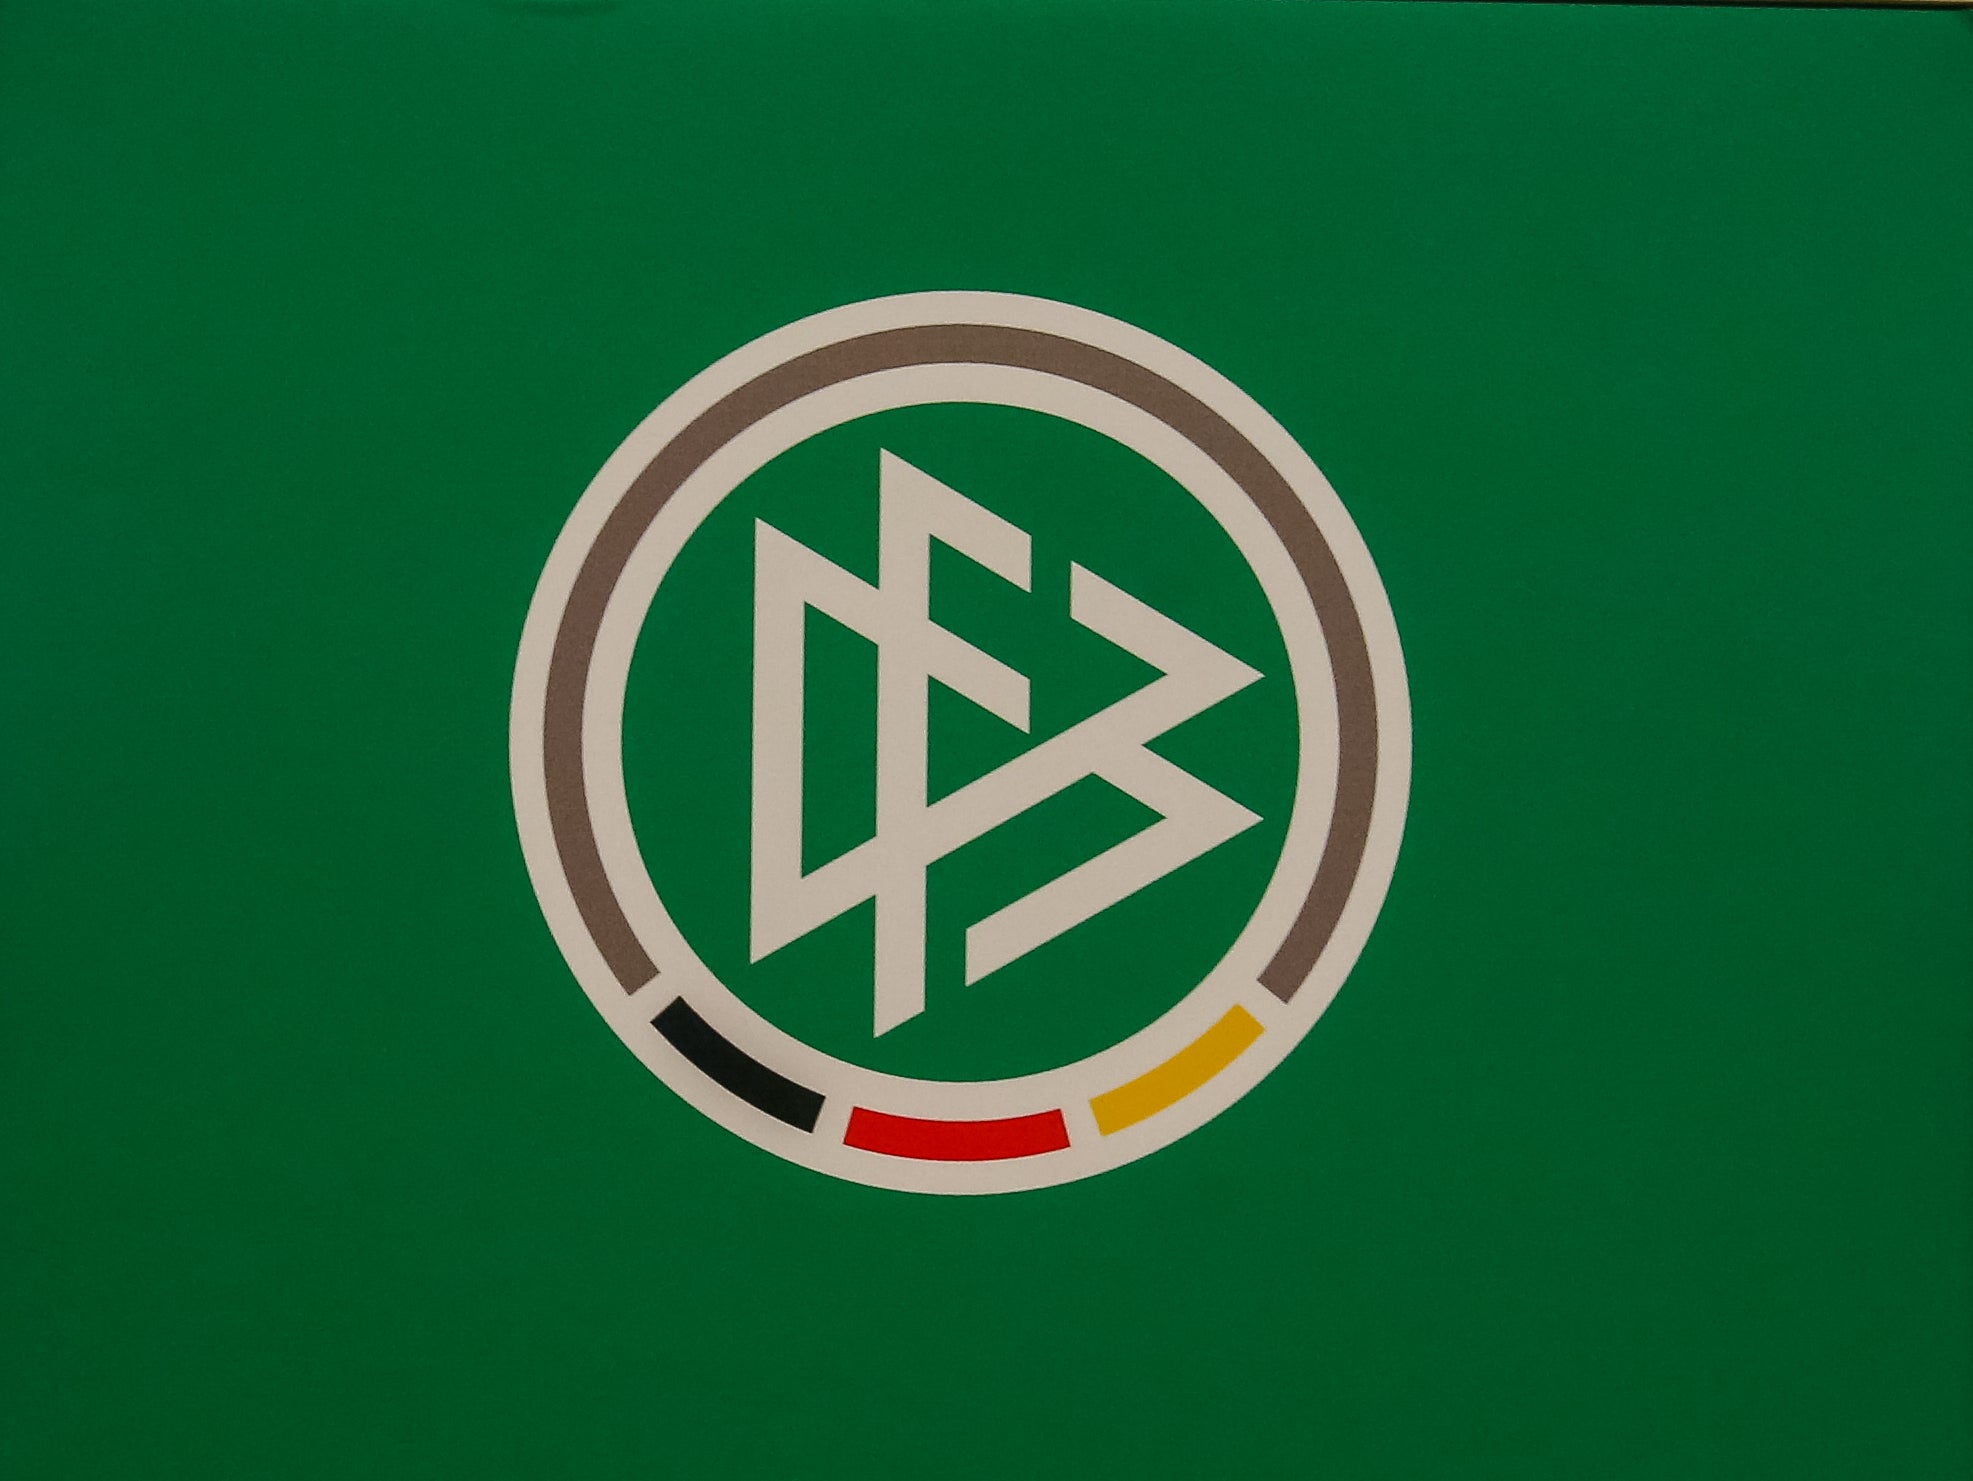 The DFB announced the change in regulations on Thursday